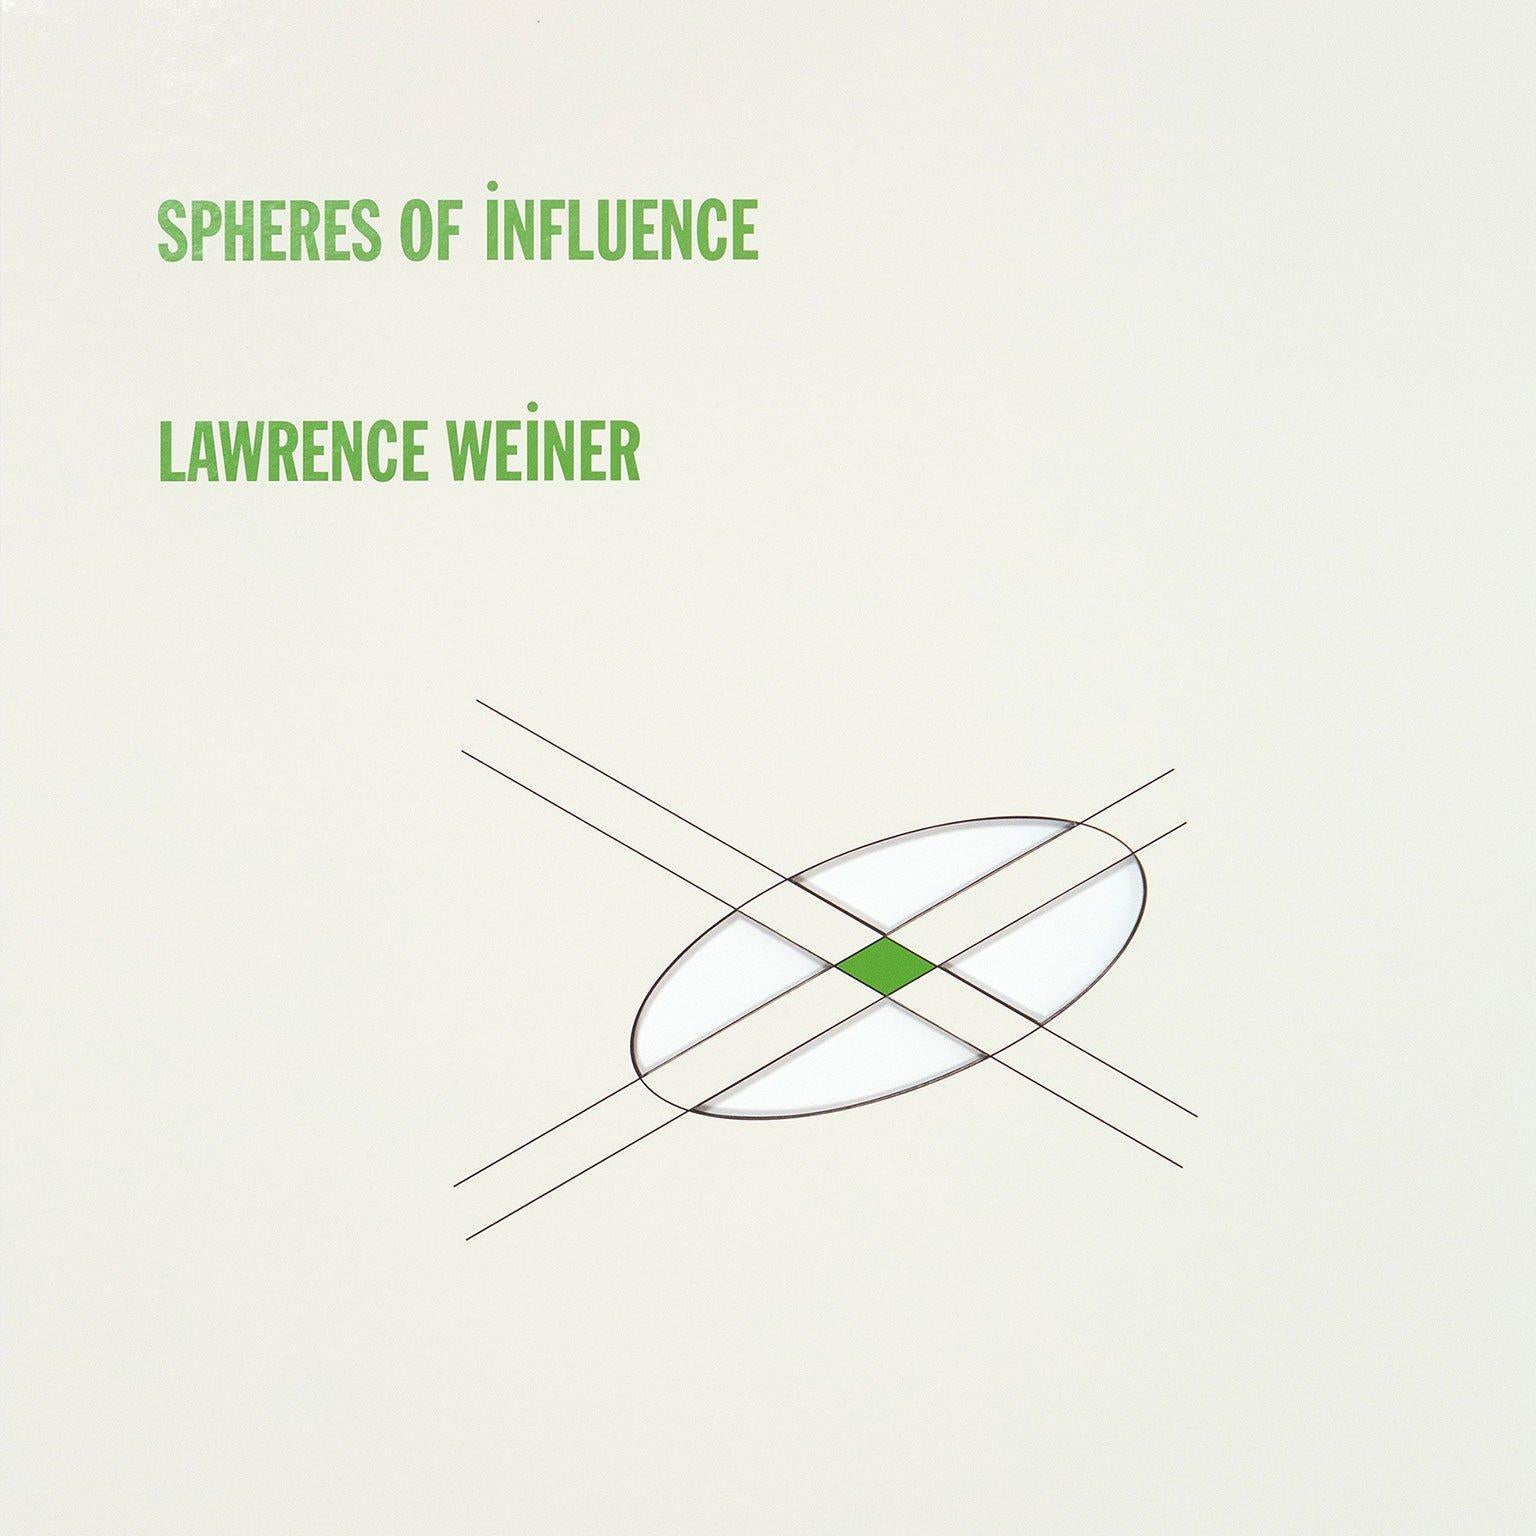 Spheres of Influence - Conceptual Print by Lawrence Weiner